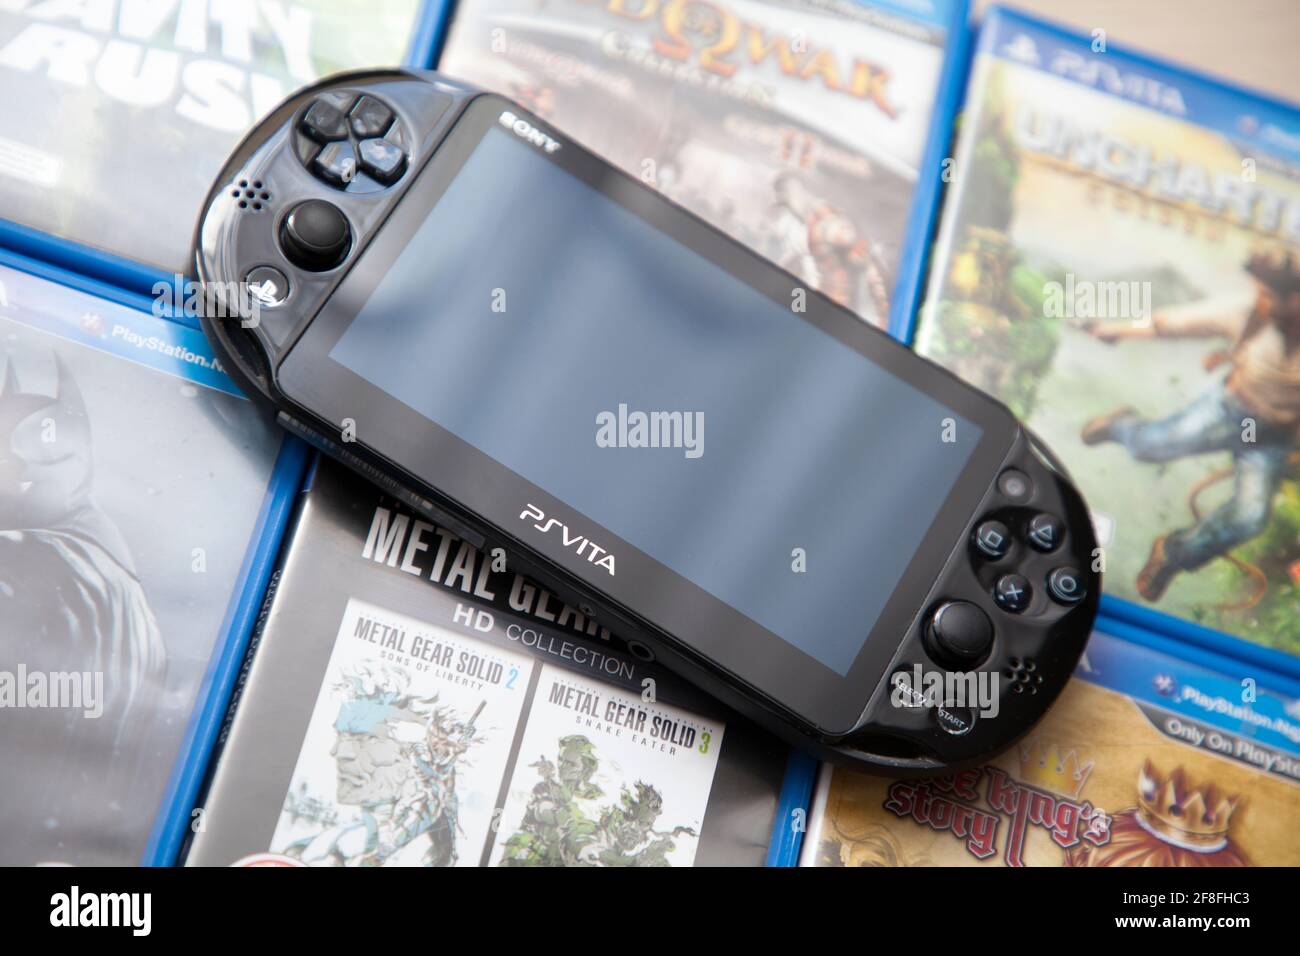 Sony Playstation Vita on top of game cases Stock Photo - Alamy